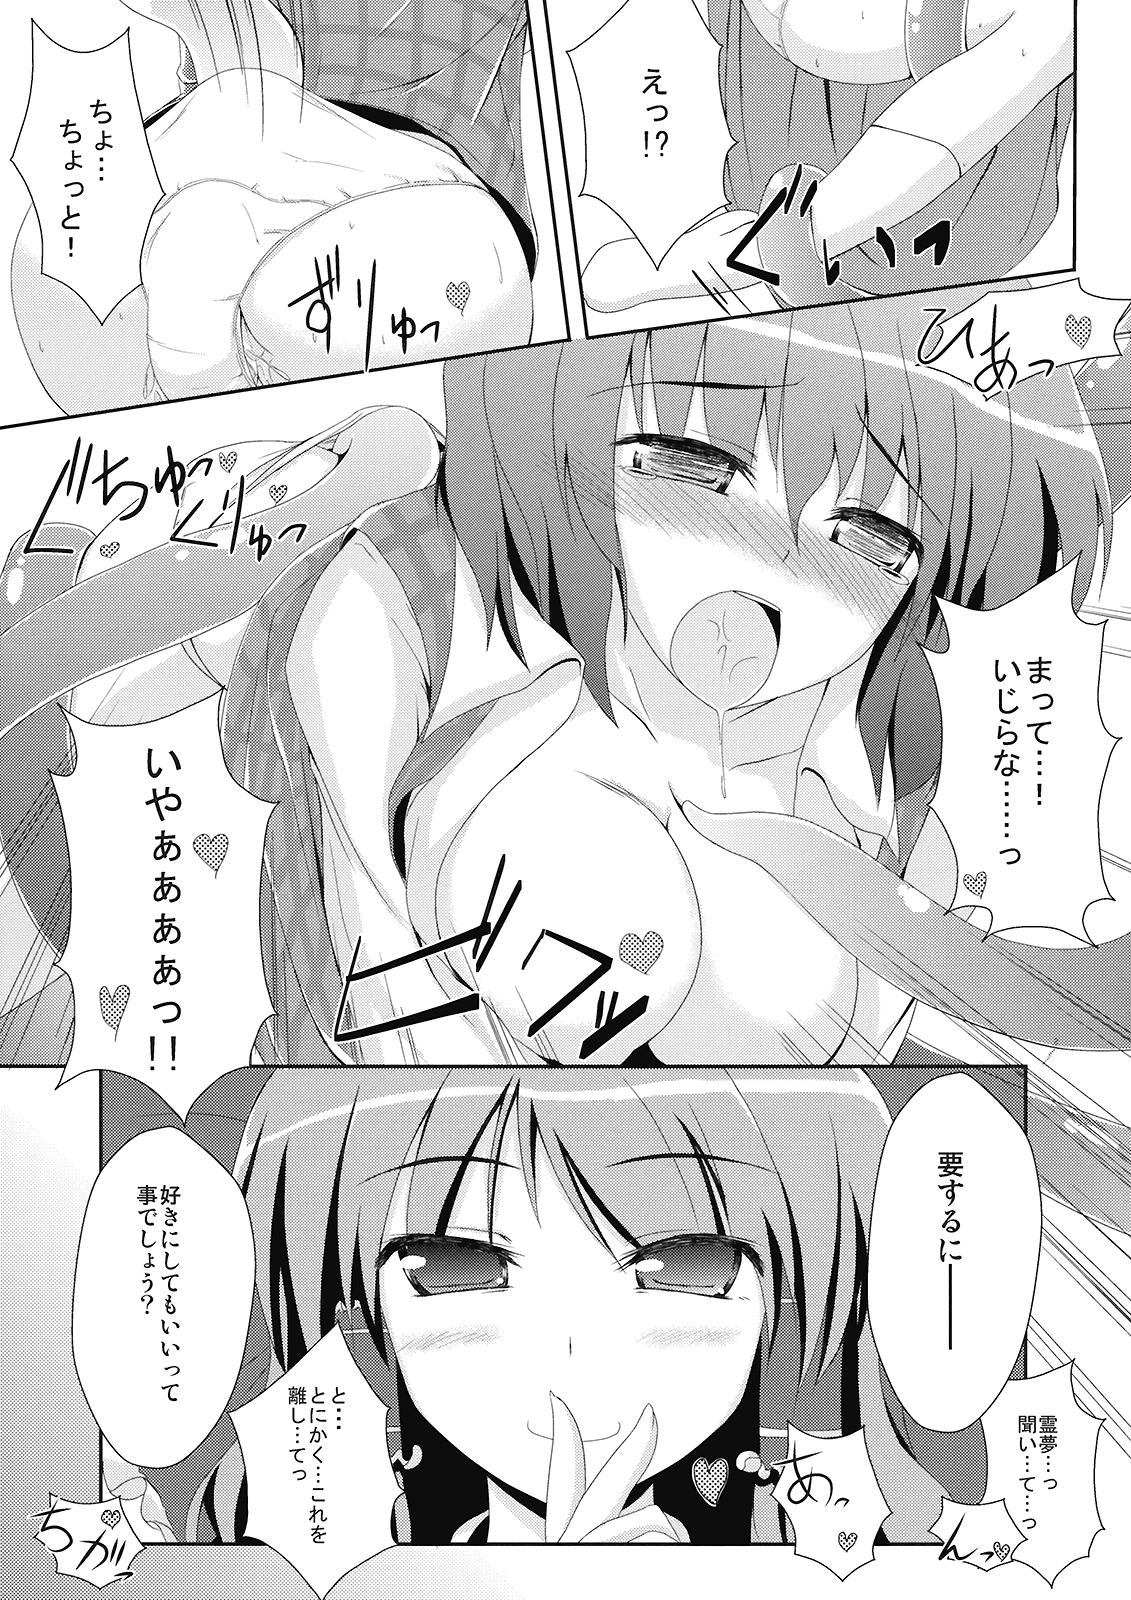 Pussylicking Toaru Flower Master no Baai - Touhou project Mommy - Page 9